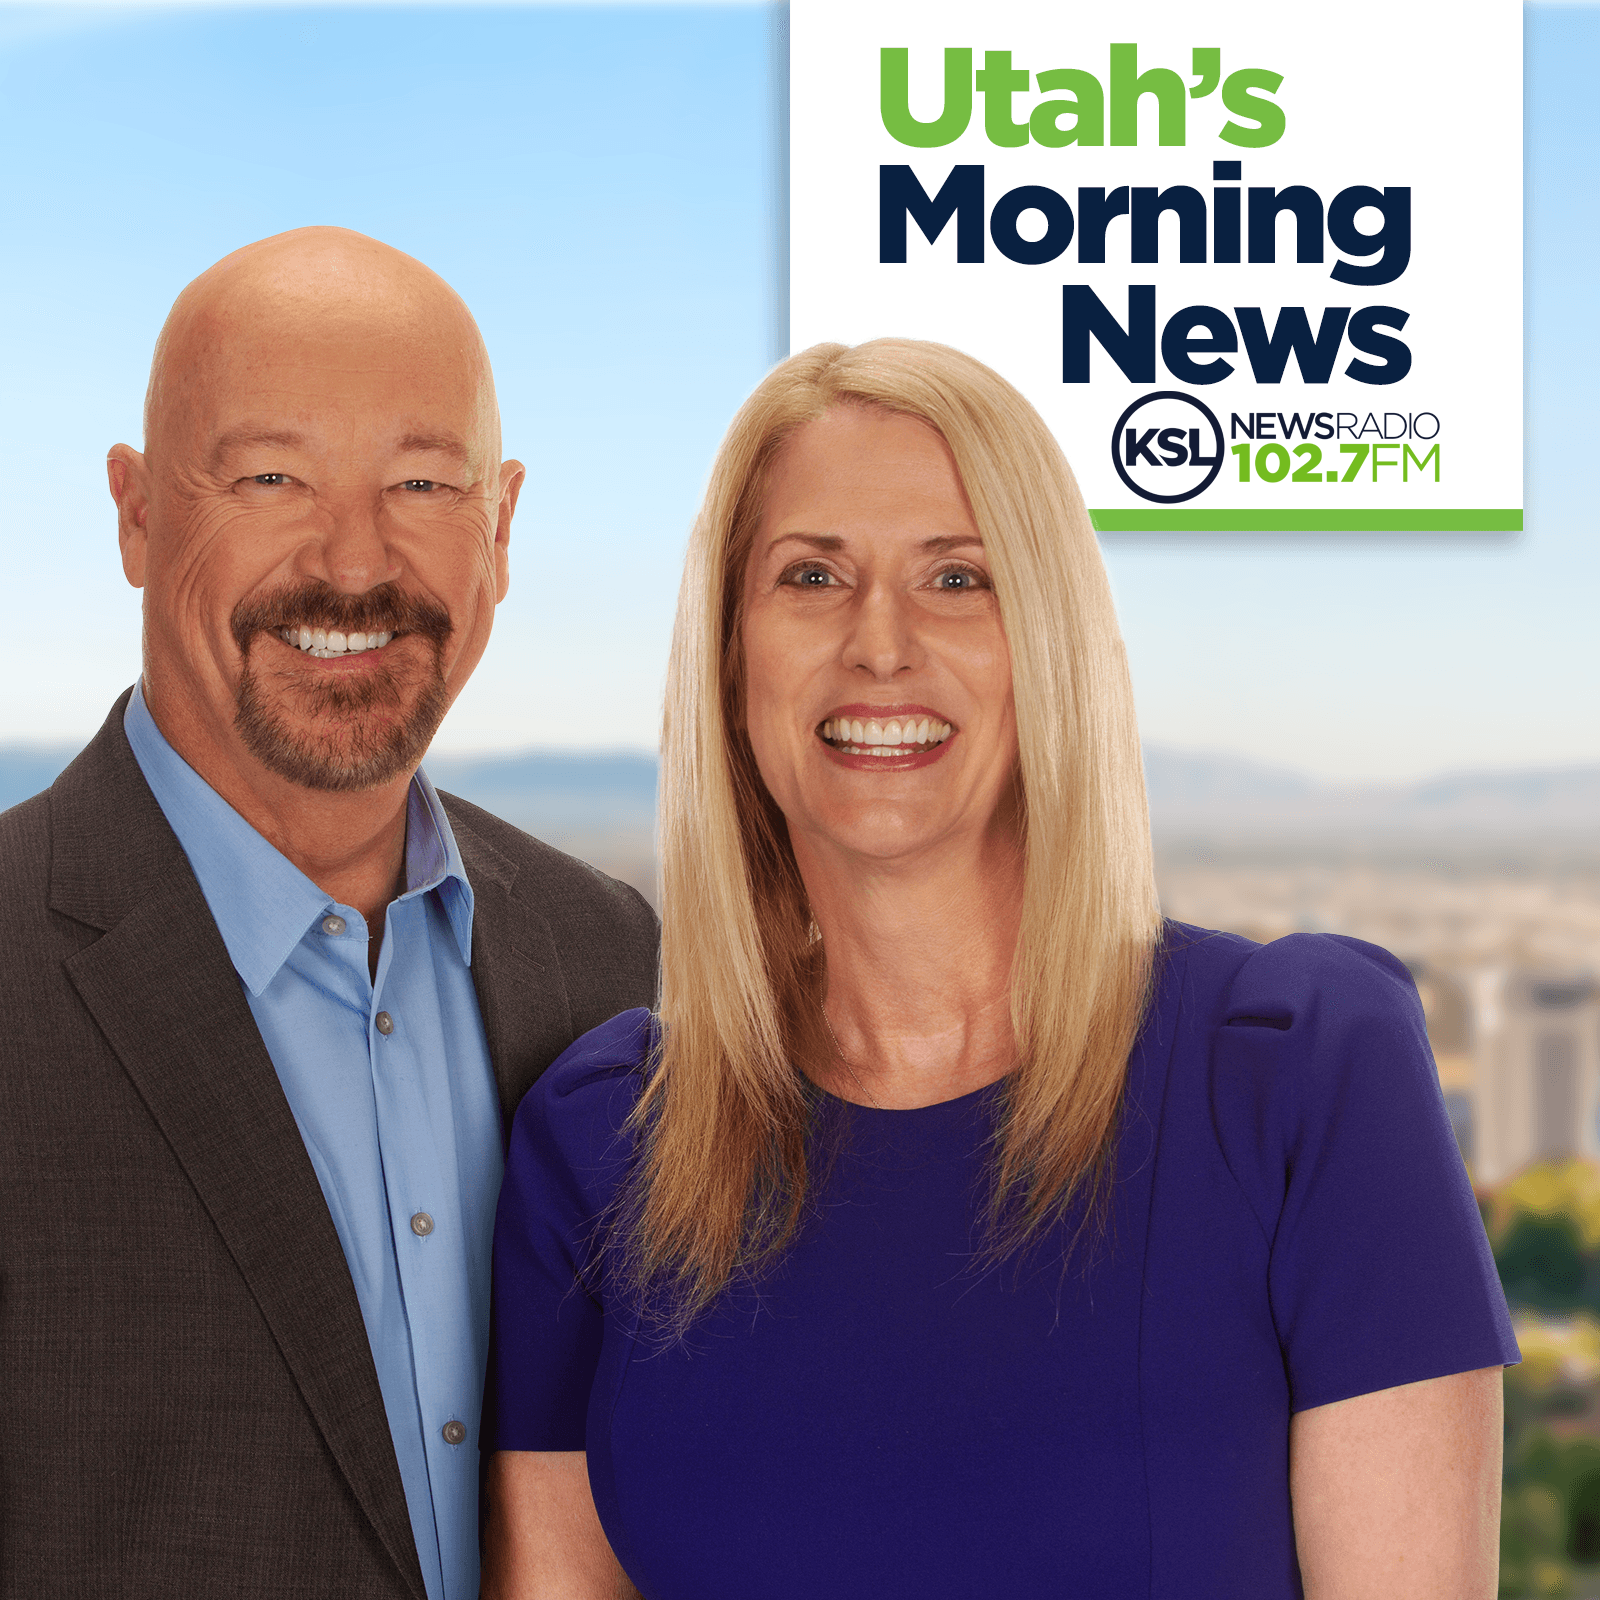 Utah Governor's race called early - November 4, 2020